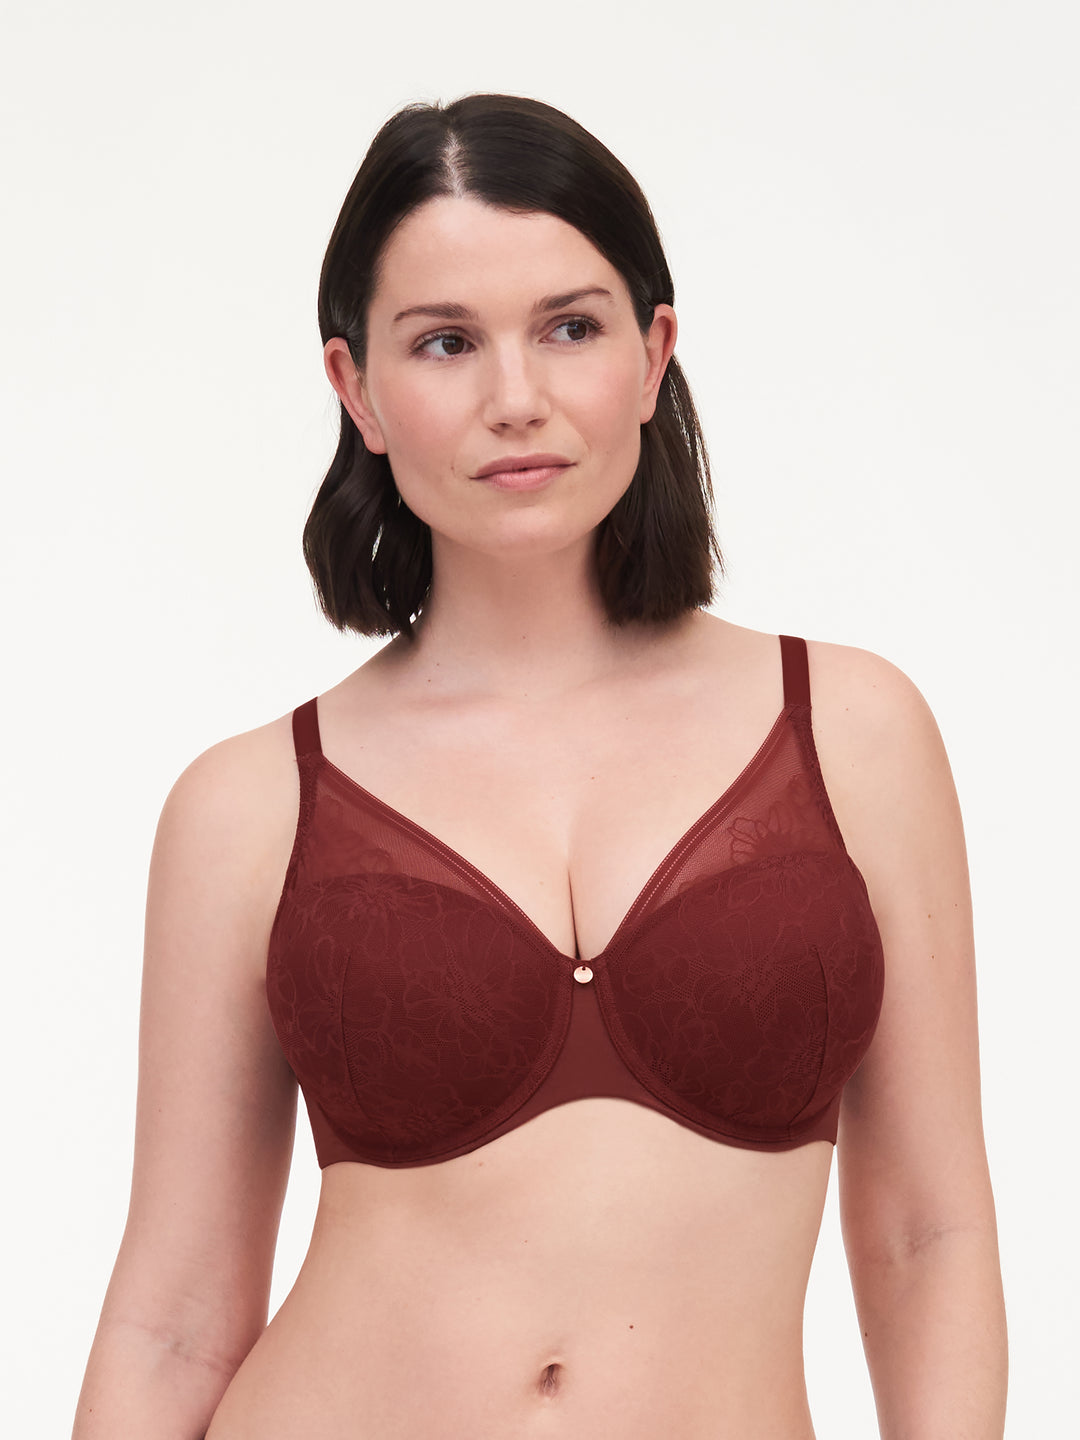 Fayreform Lace Perfect Contour Spacer Bra - Shadow - Curvy